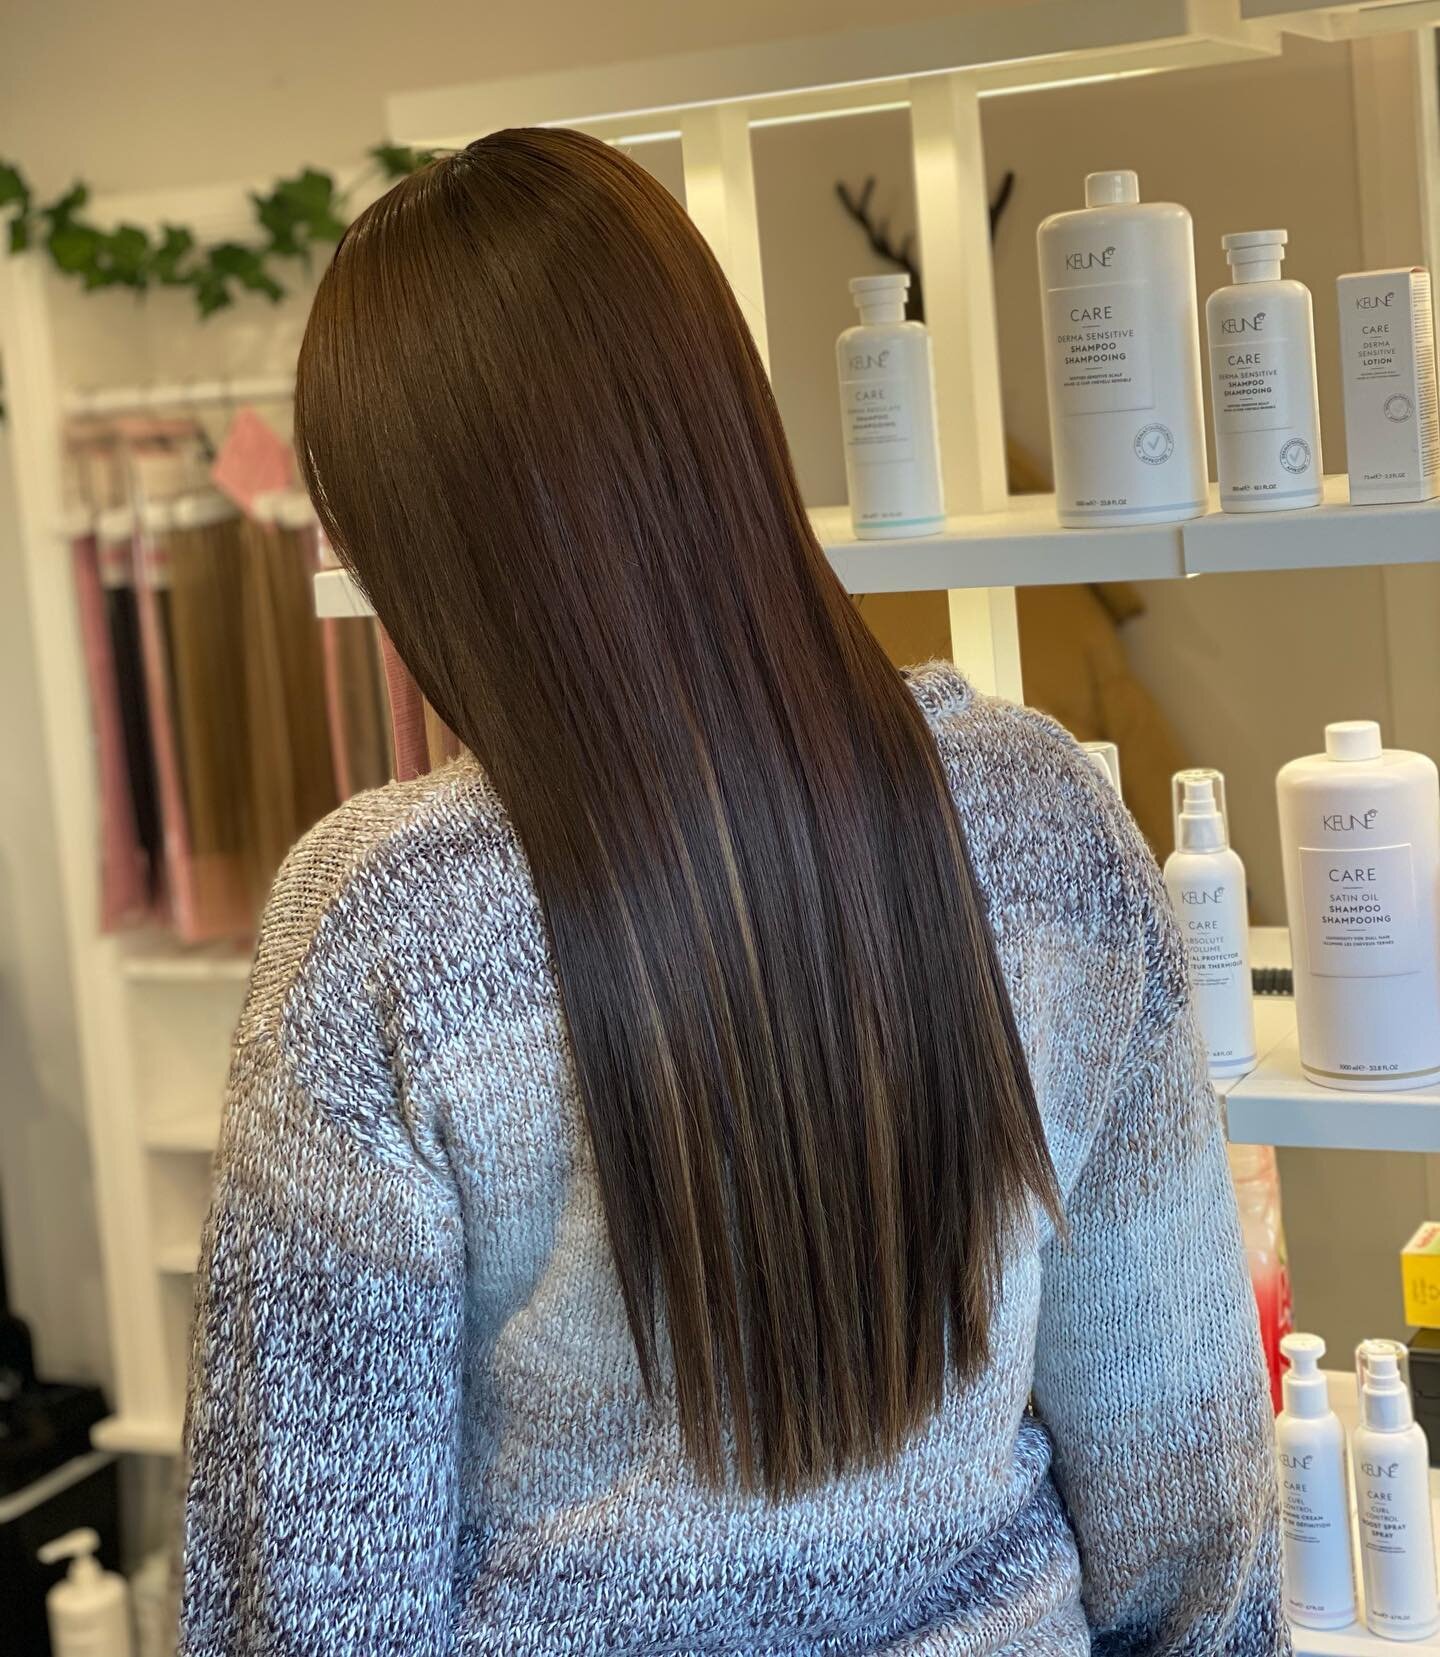 Looking oh so natural, long and lush with @vixenandluxe Smooth Weft Extensions ✨
Check out that before! 🤯